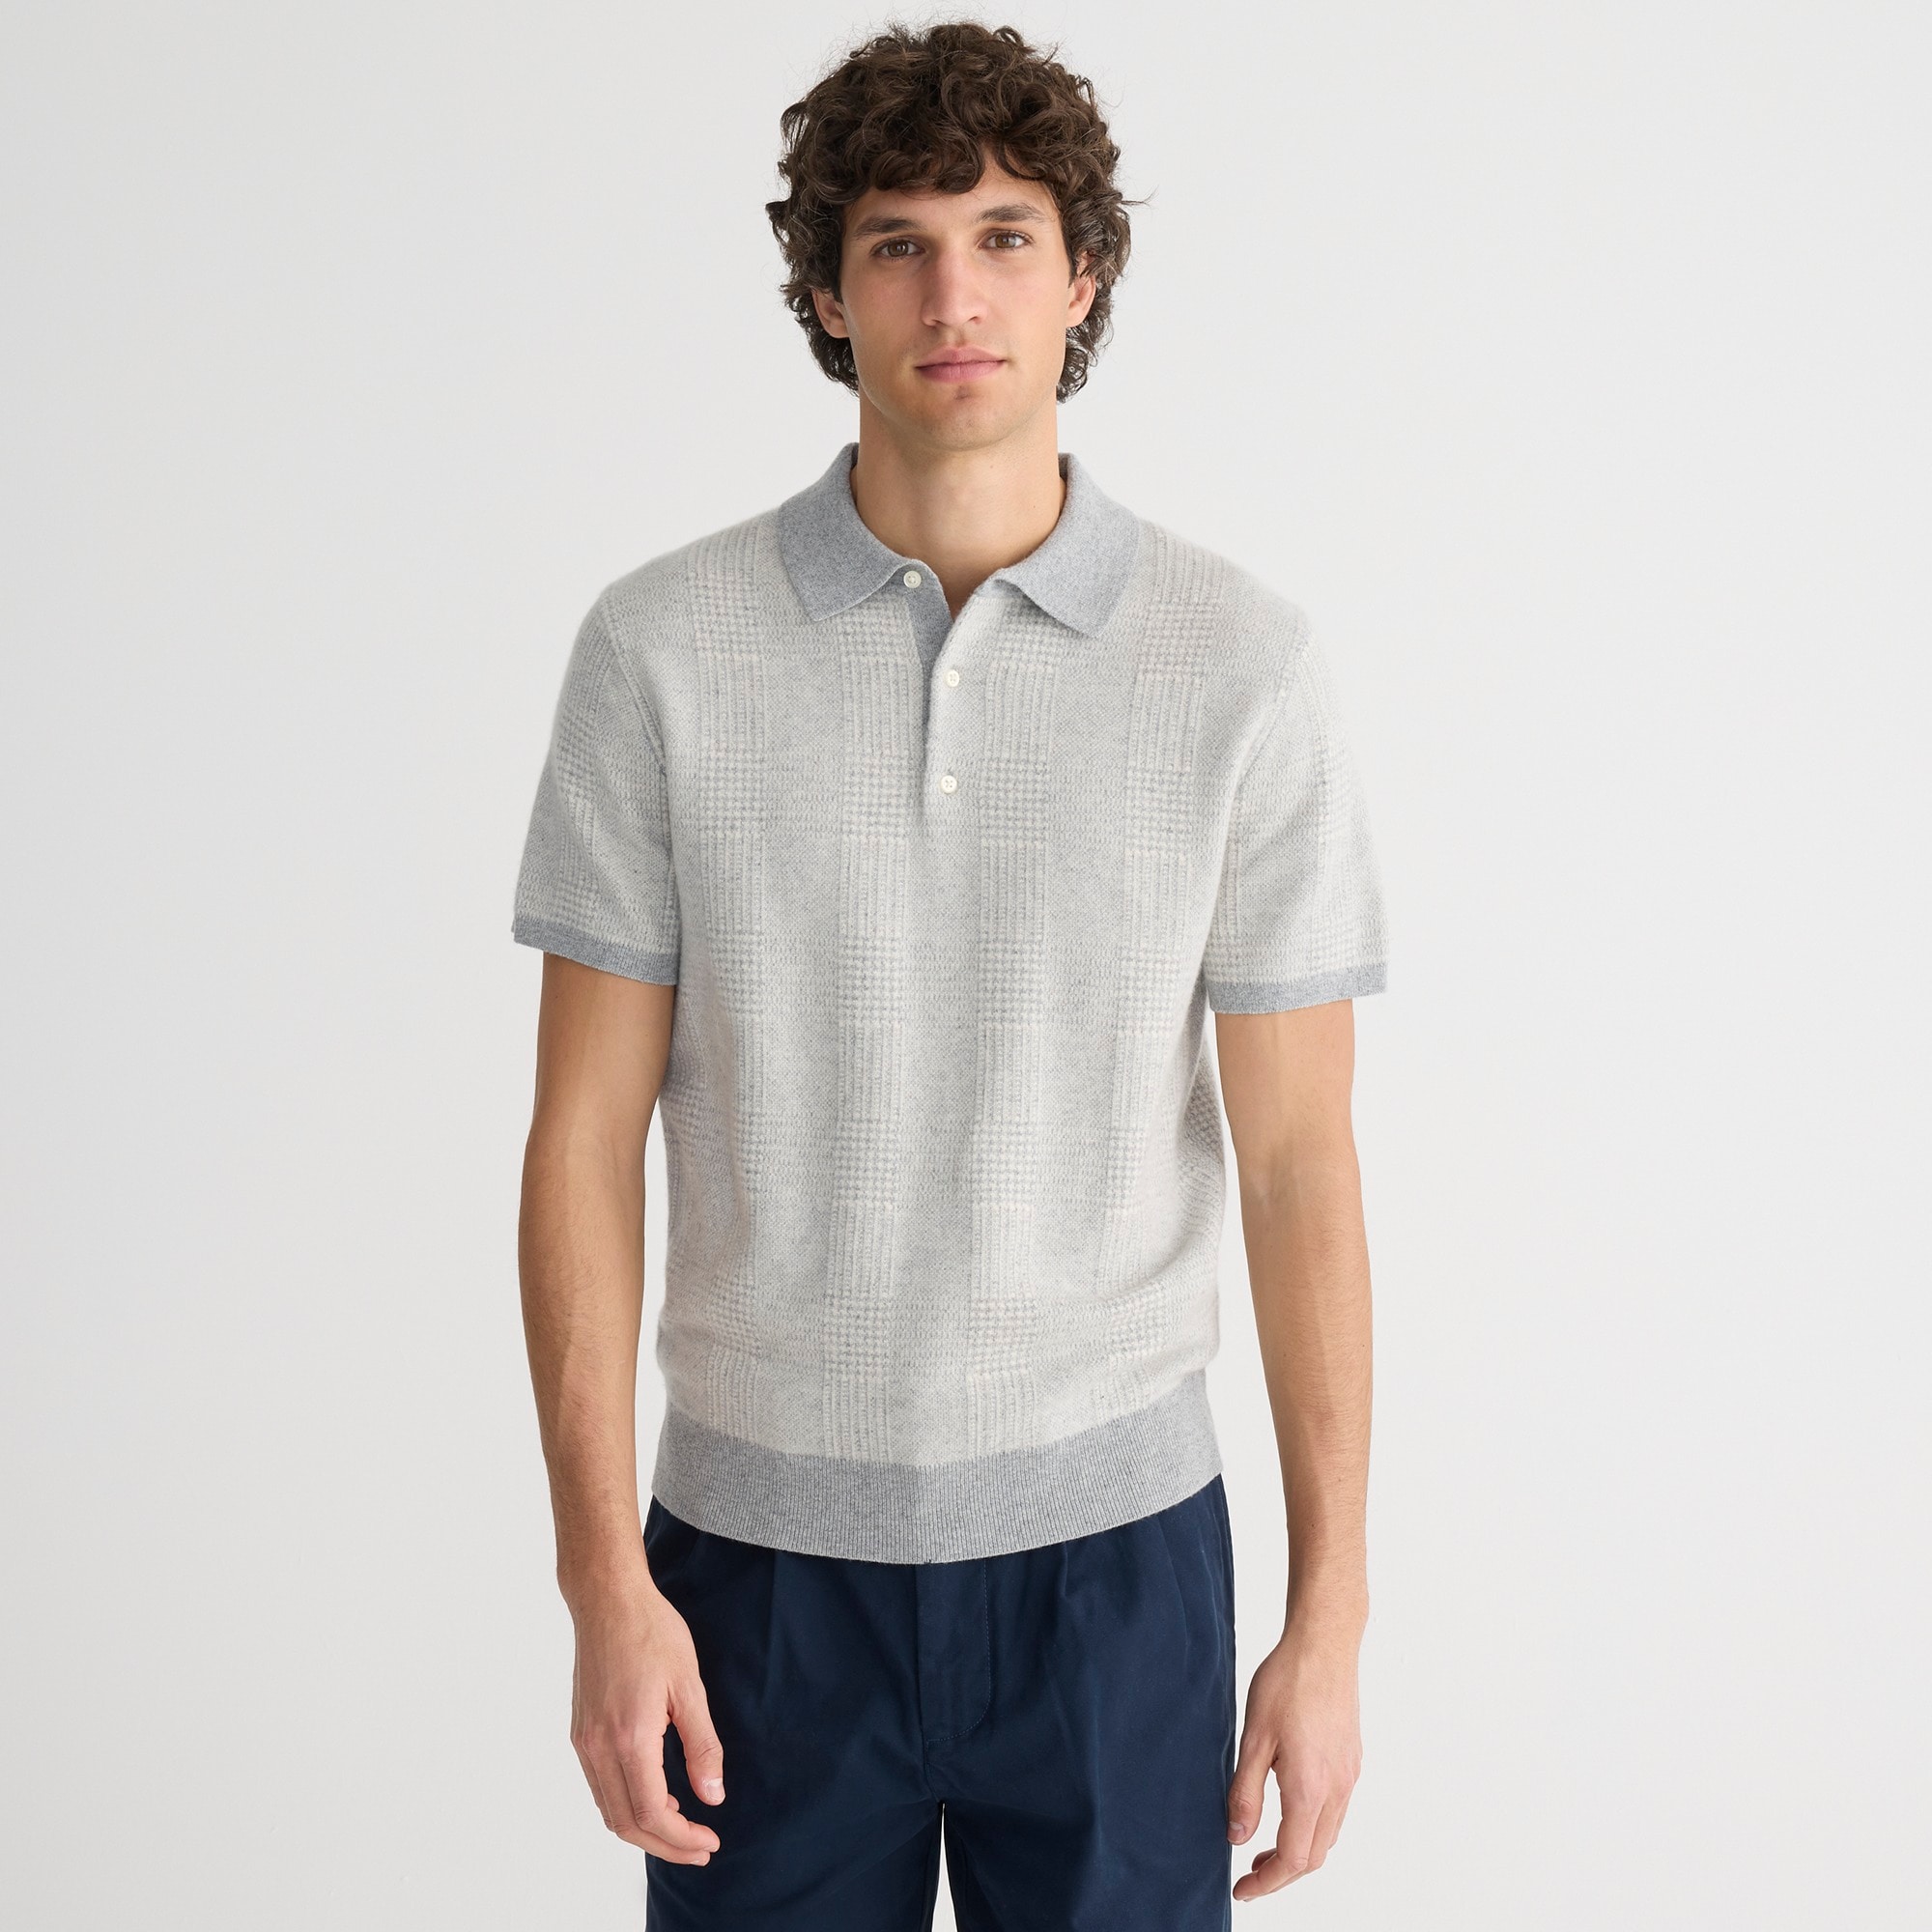 mens Short-sleeve cashmere sweater-polo in glen plaid